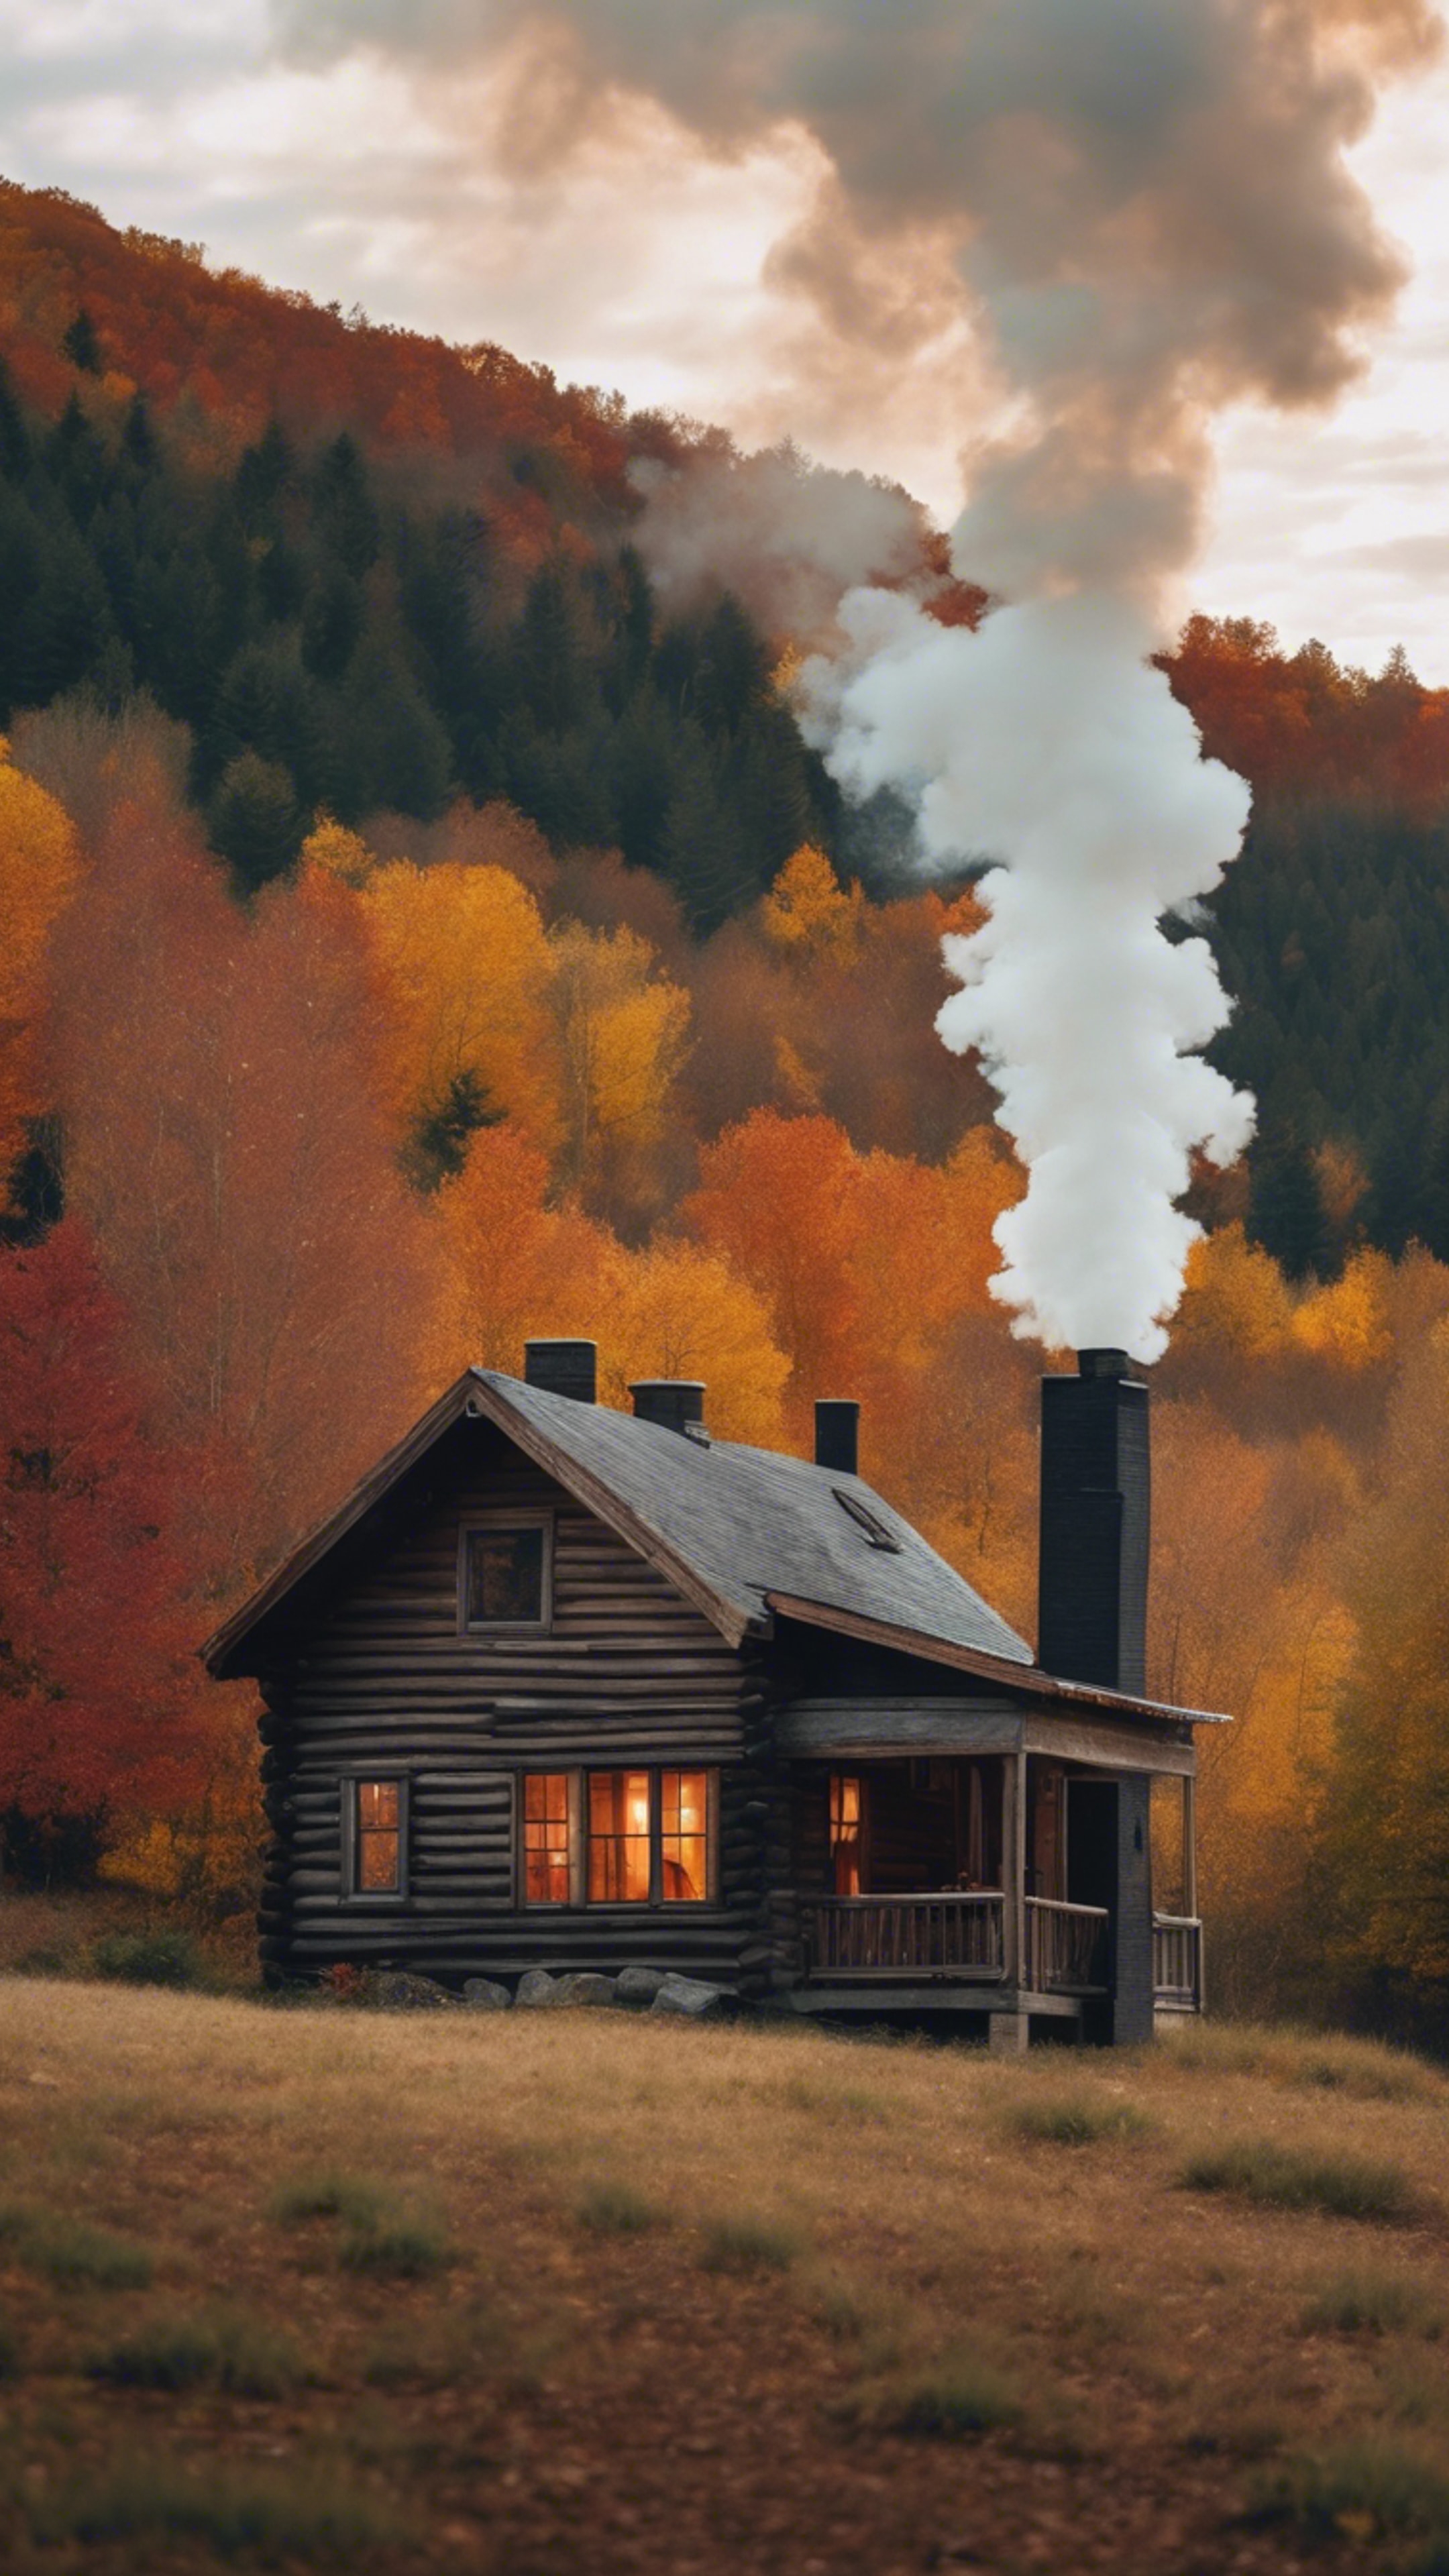 A cozy rustic cabin surrounded by fall foliage, smoke rising gently from its chimney.壁紙[61e015739e8841e69879]